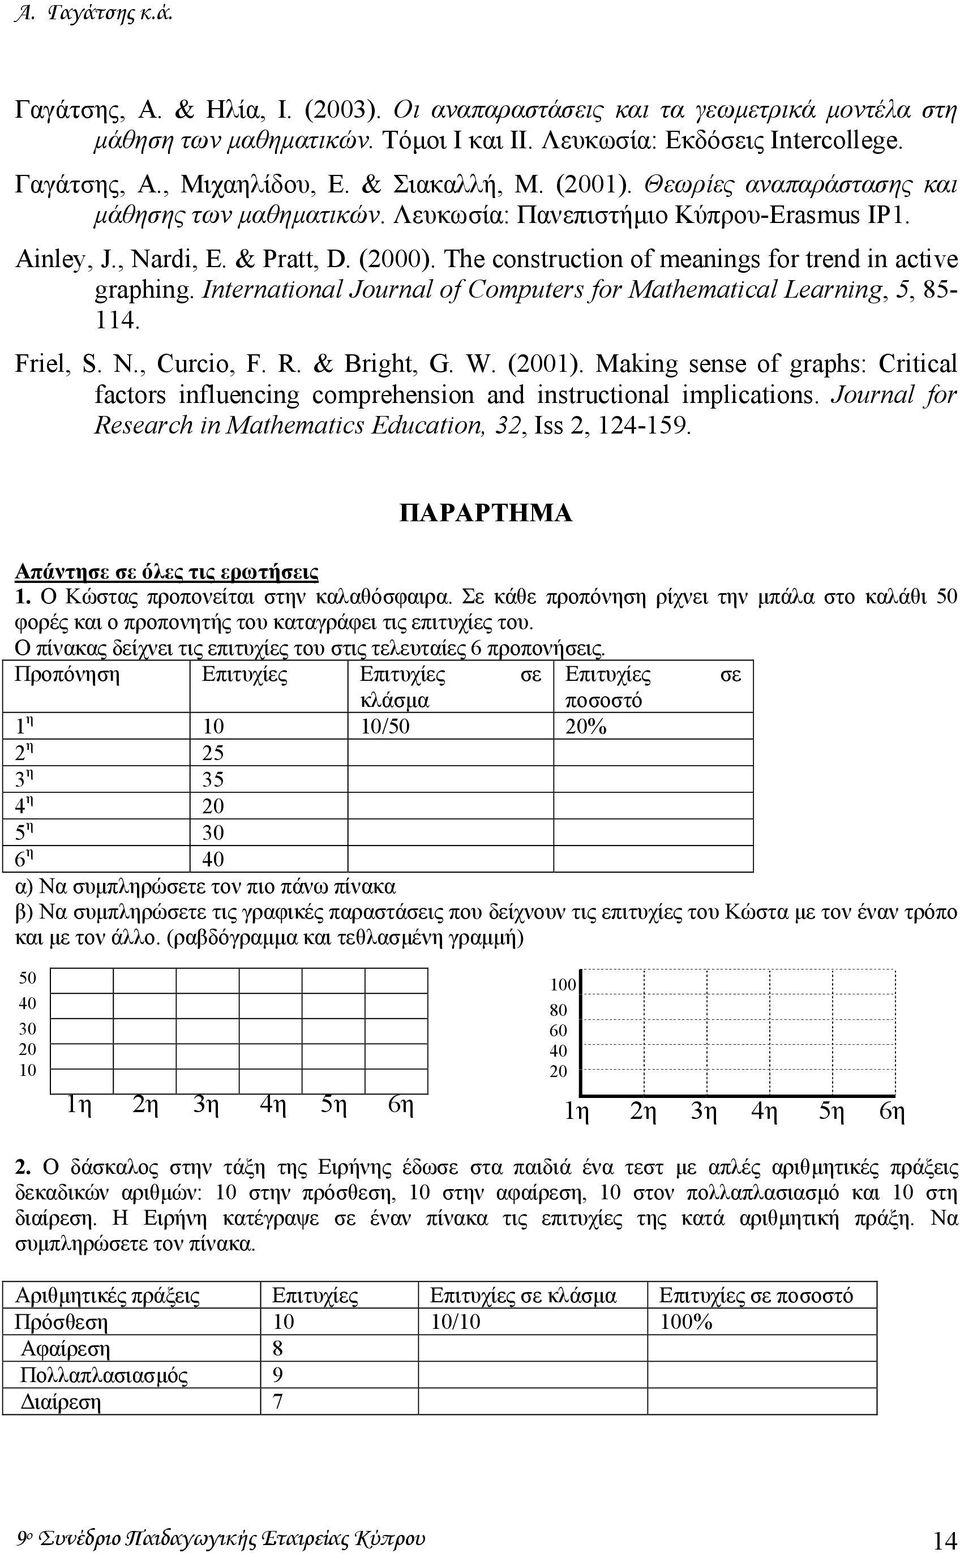 The construction of meanings for trend in active graphing. International Journal of Computers for Mathematical Learning, 5, 85-114. Friel, S. N., Curcio, F. R. & Bright, G. W. (2001).